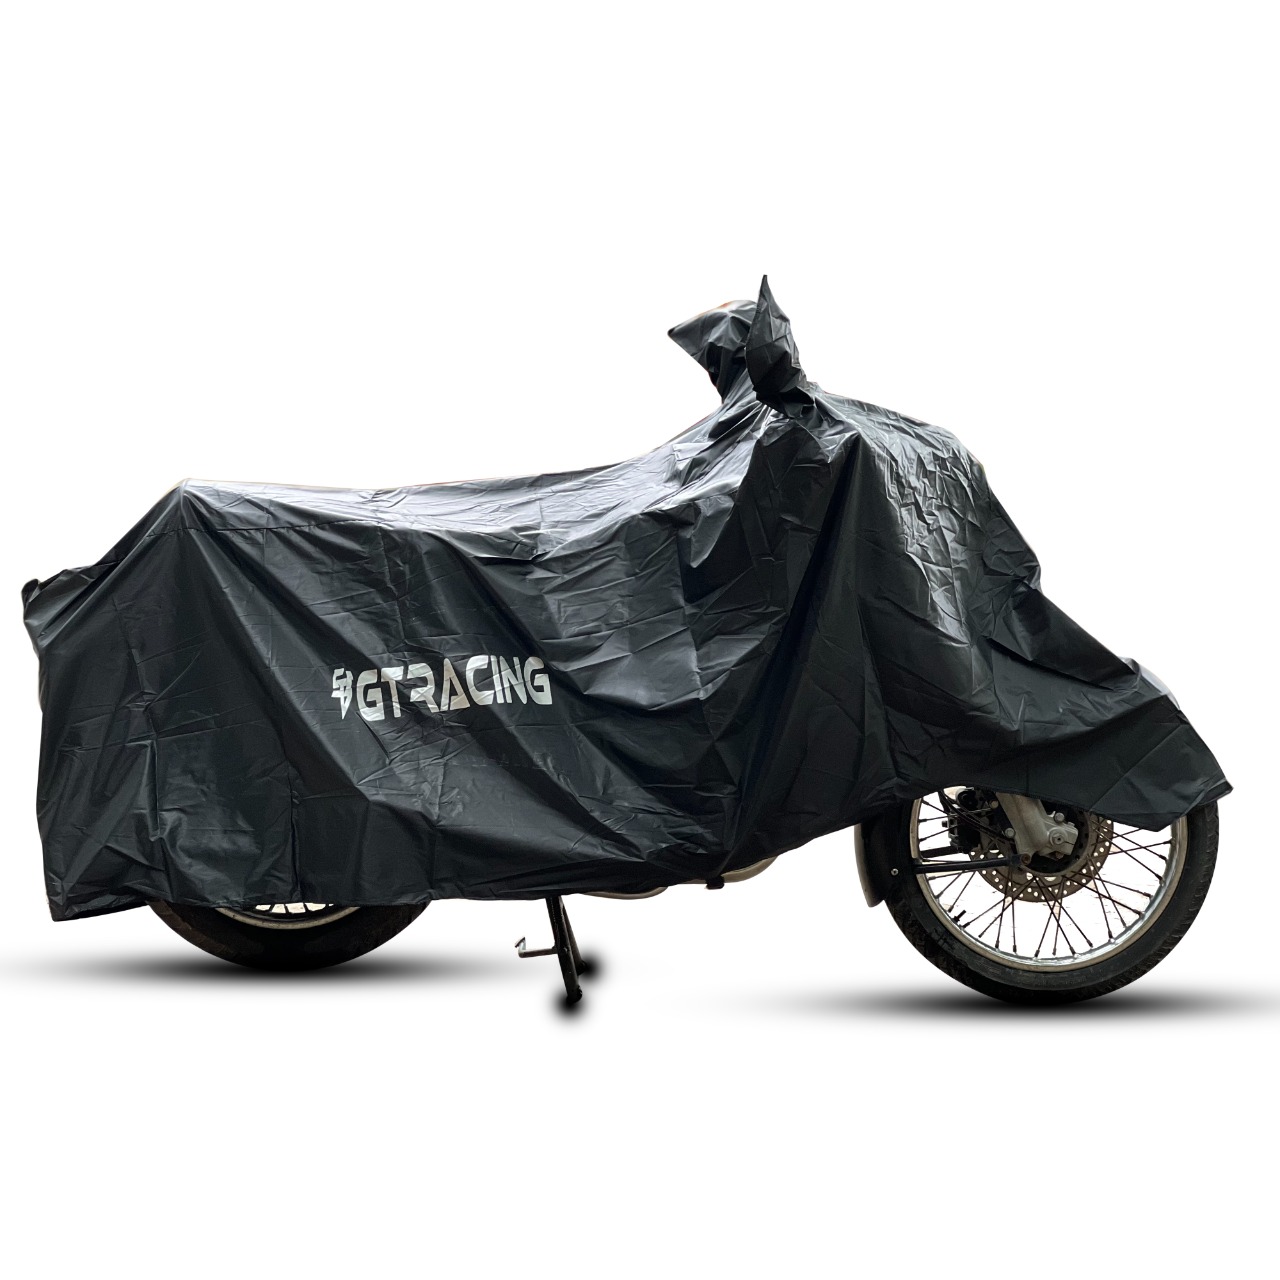 Steelbird 100% Waterproof Bike Cover GT Racing UV Protection Water-Resistant & Dustproof (Black PVC), Bike Body Cover with Carry Bag (All Scooter Activa Electric Scooty Size)